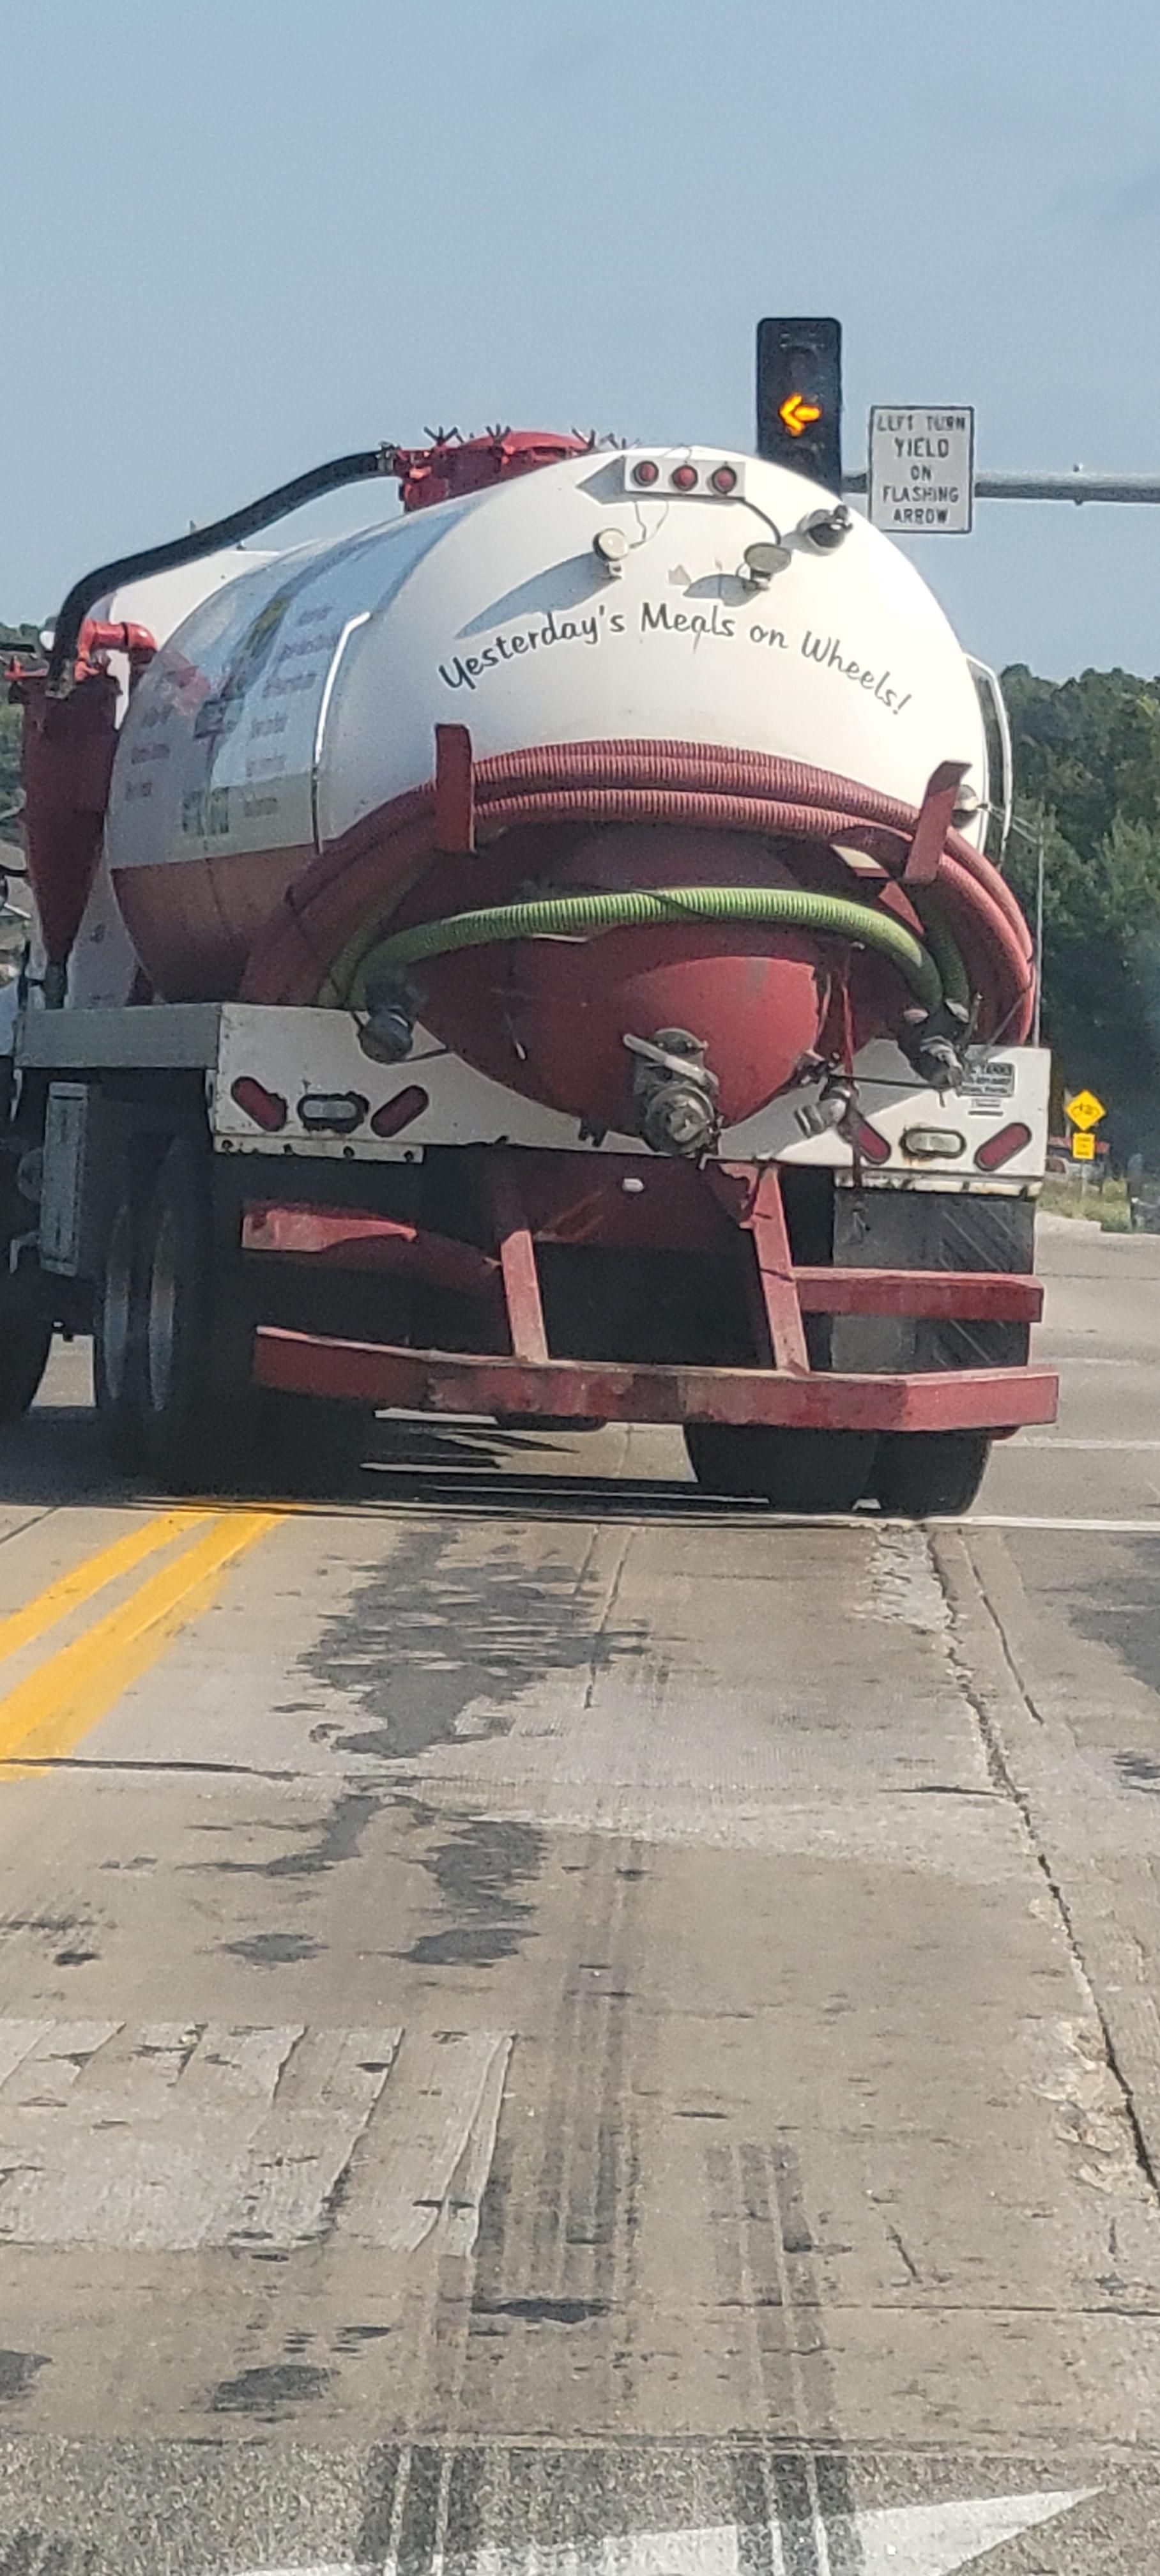 This is the back of a sewage truck in my town.